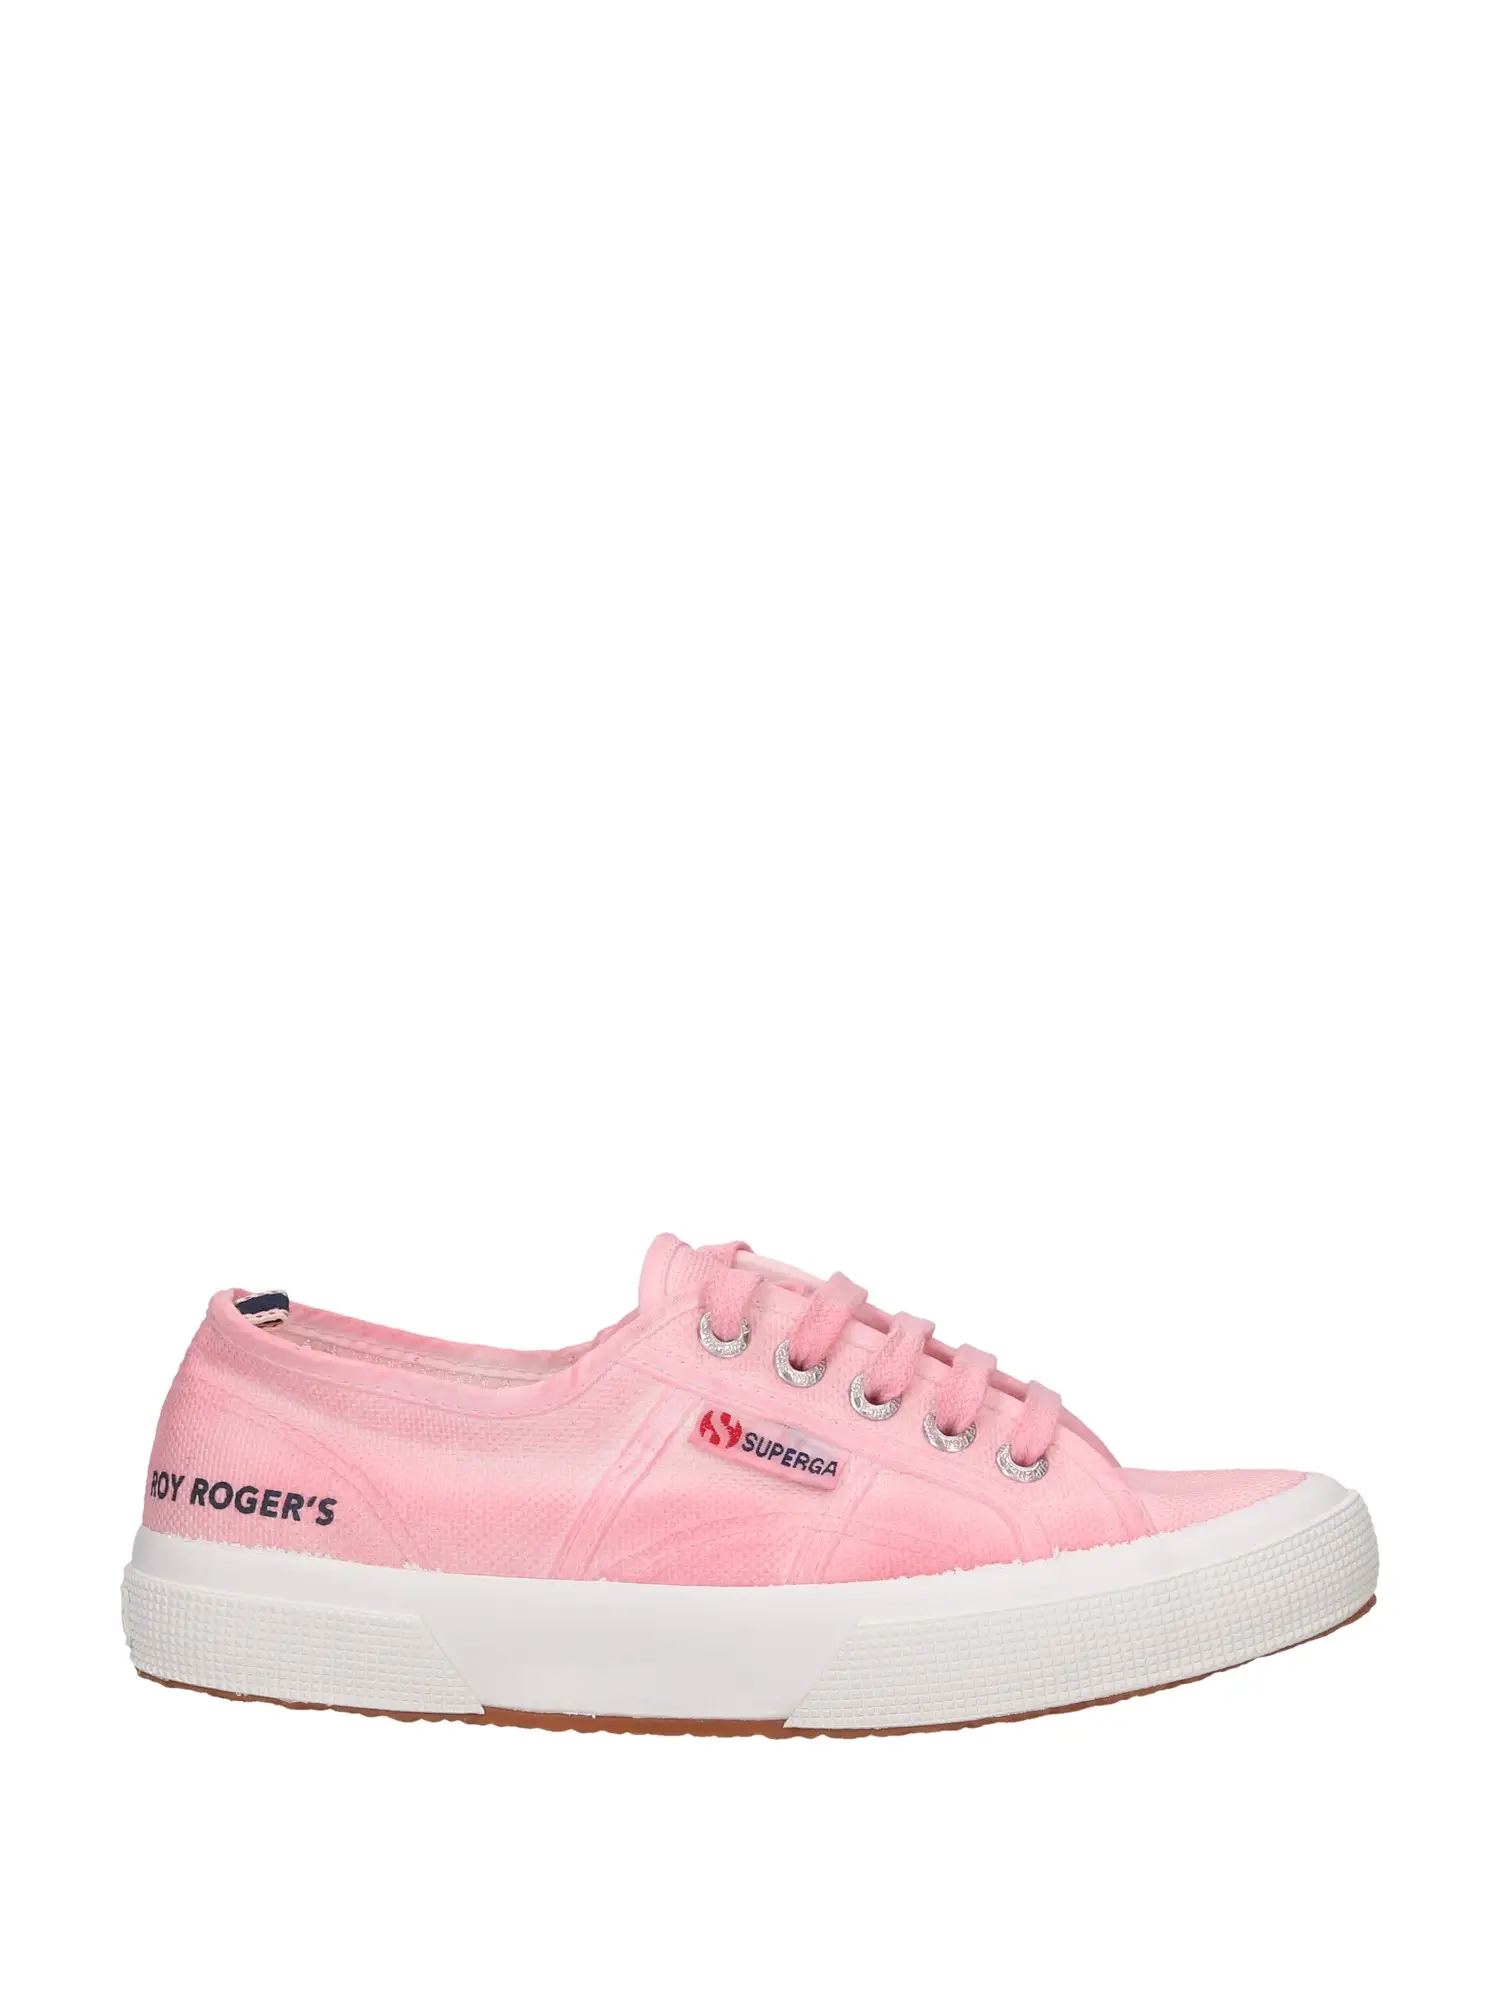 SNEAKERS DONNA - SUPERGA X ROY ROGER'S - S3137HW - ROSA, 41